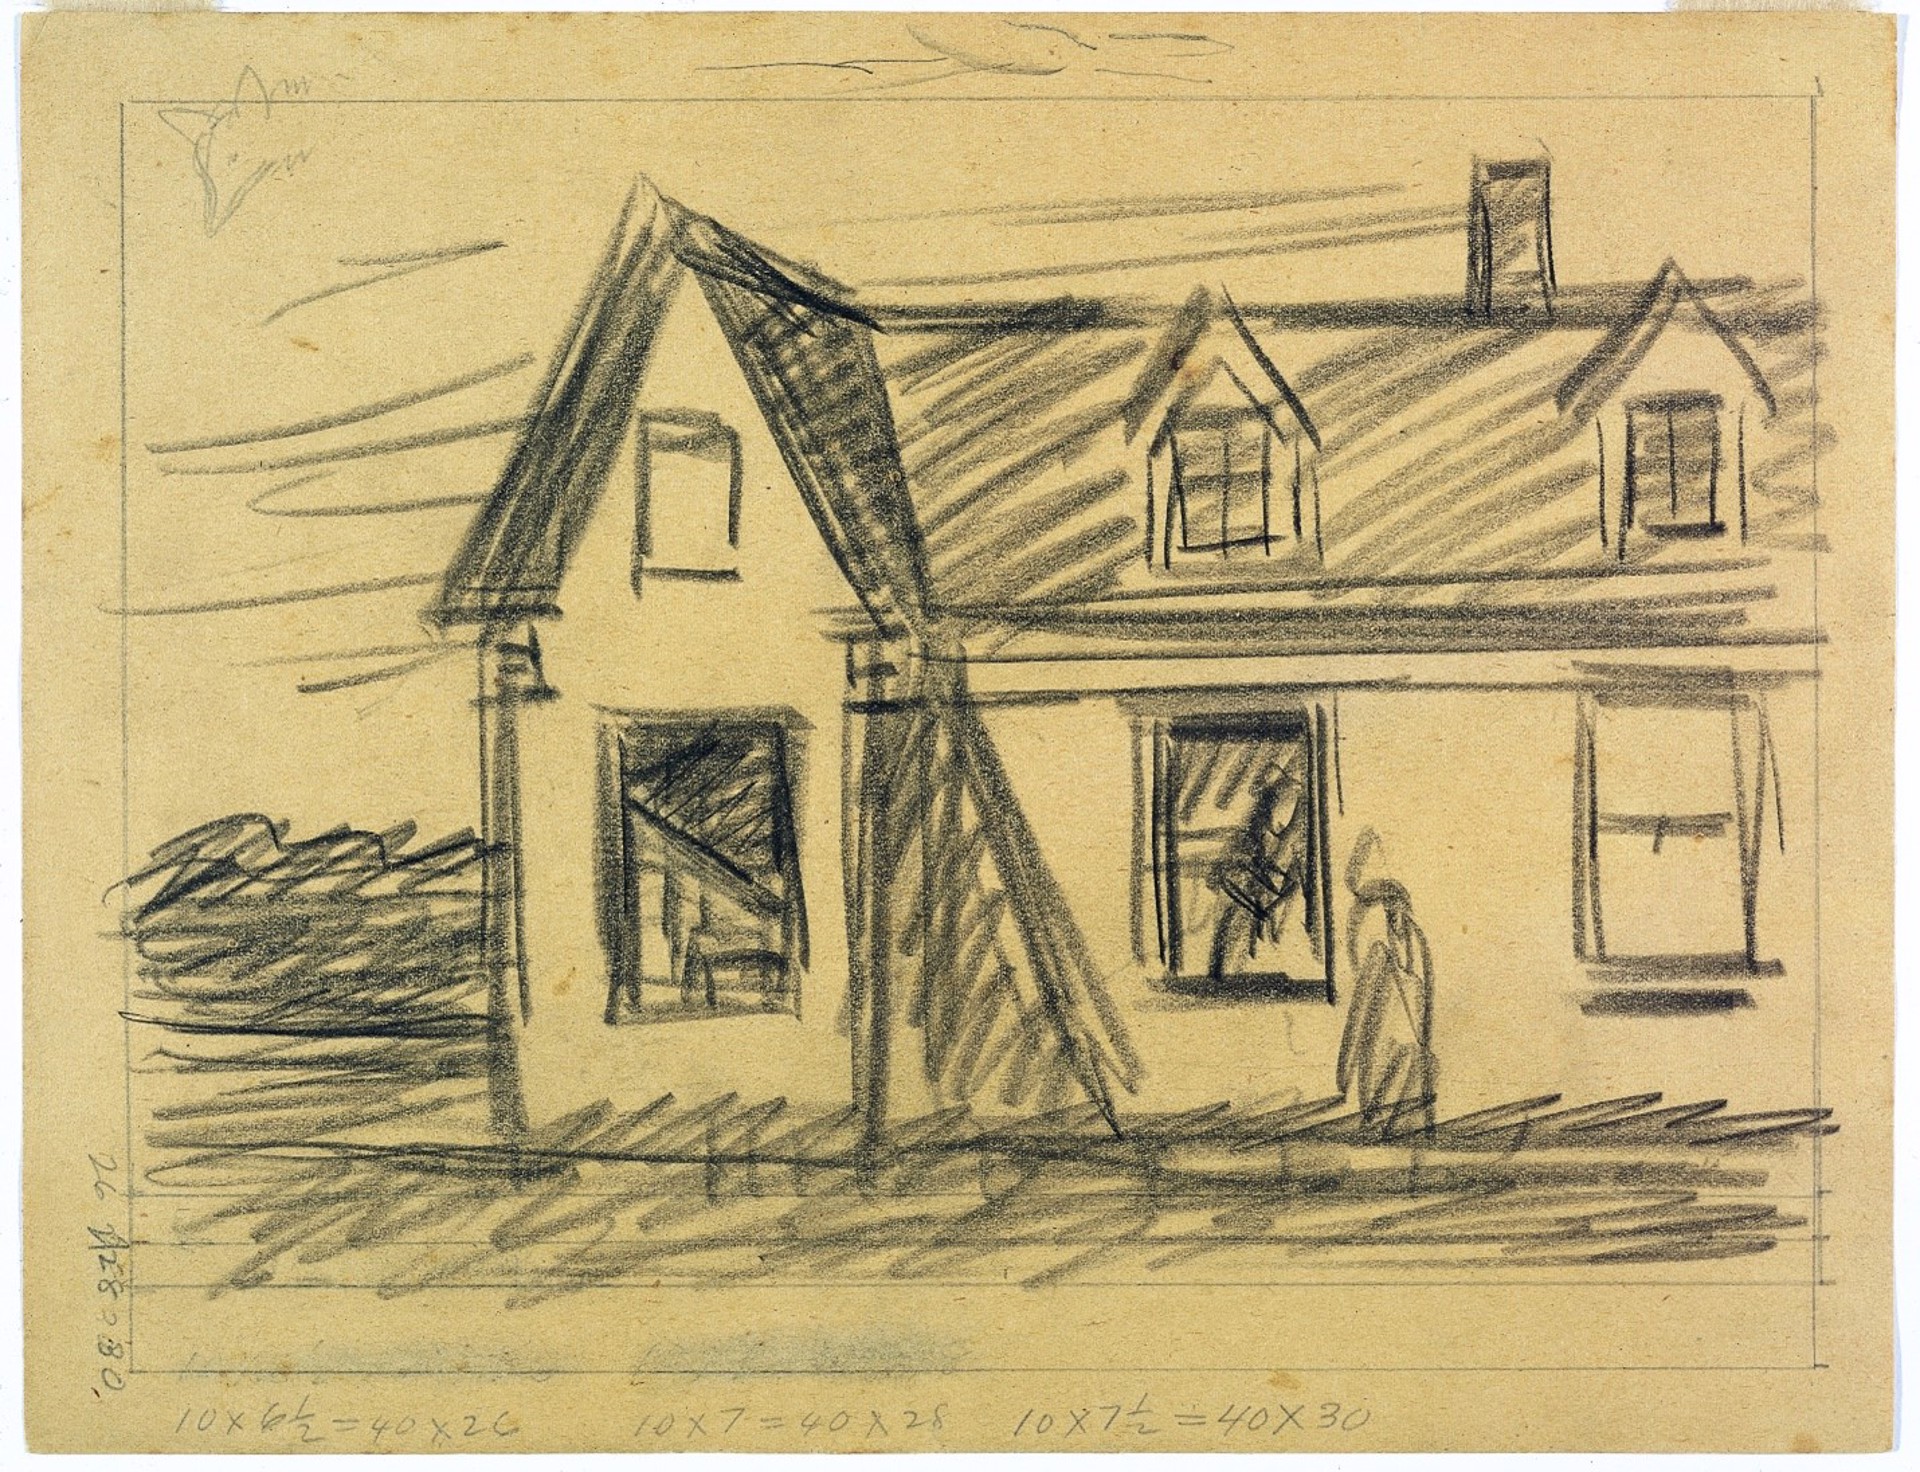 Study for “High Noon” by Edward Hopper